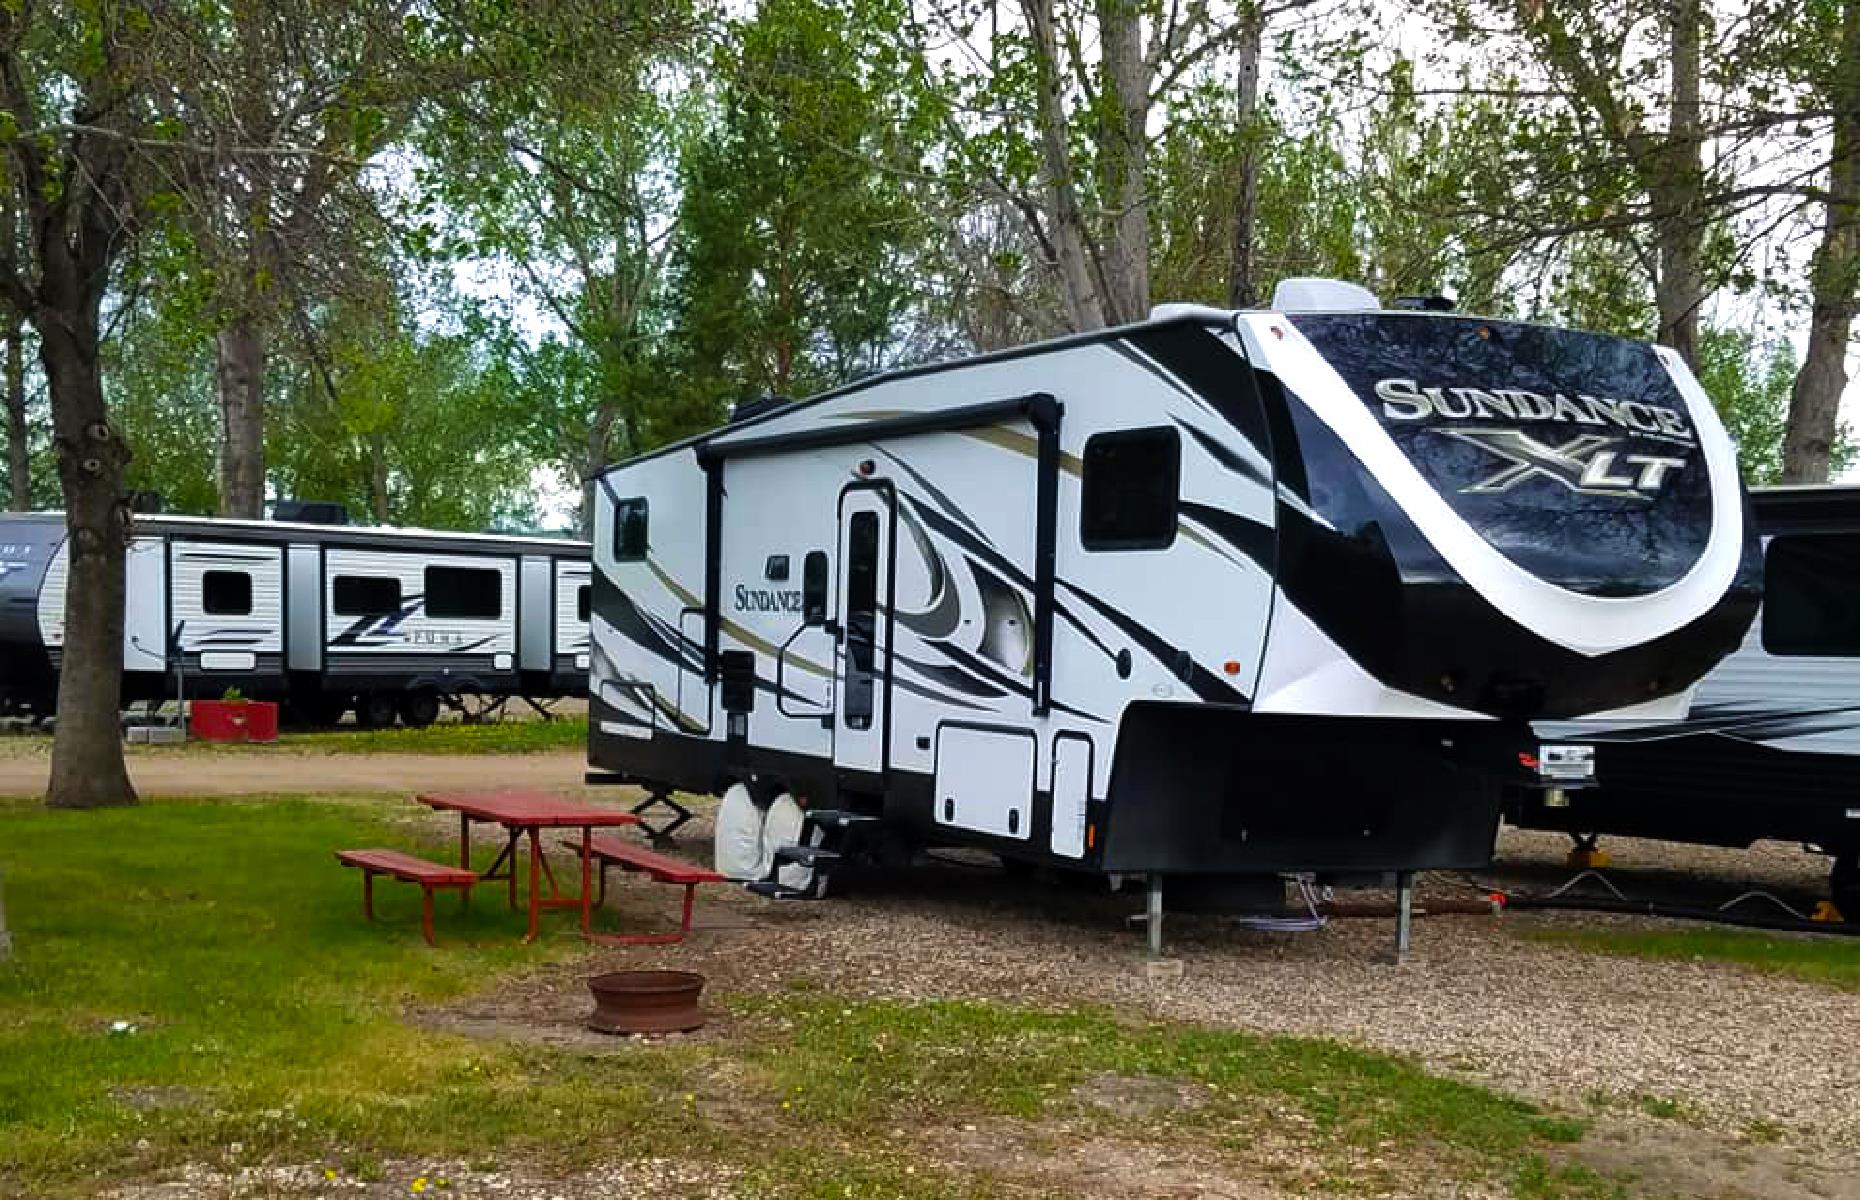 <p>They're a friendly bunch at the <a href="https://www.roughriderrvresort.com/">Roughrider RV Resort and Campground</a>. Touted as the place "Where Land and Sky Meet the Great Plains", the family-owned park has more than 100 RV sites dotted across its grounds – many have full hook-ups, and both pull-through and back-in sites are available. Hemmed in by forestland, it's right by the Souris River and close to the city of Minot, known for its Scandinavian heritage and aviation history. <a href="https://www.loveexploring.com/gallerylist/86053/these-american-destinations-feel-like-youre-visiting-another-country">Check out these American destinations that feel like you're visiting a different country</a>.</p>